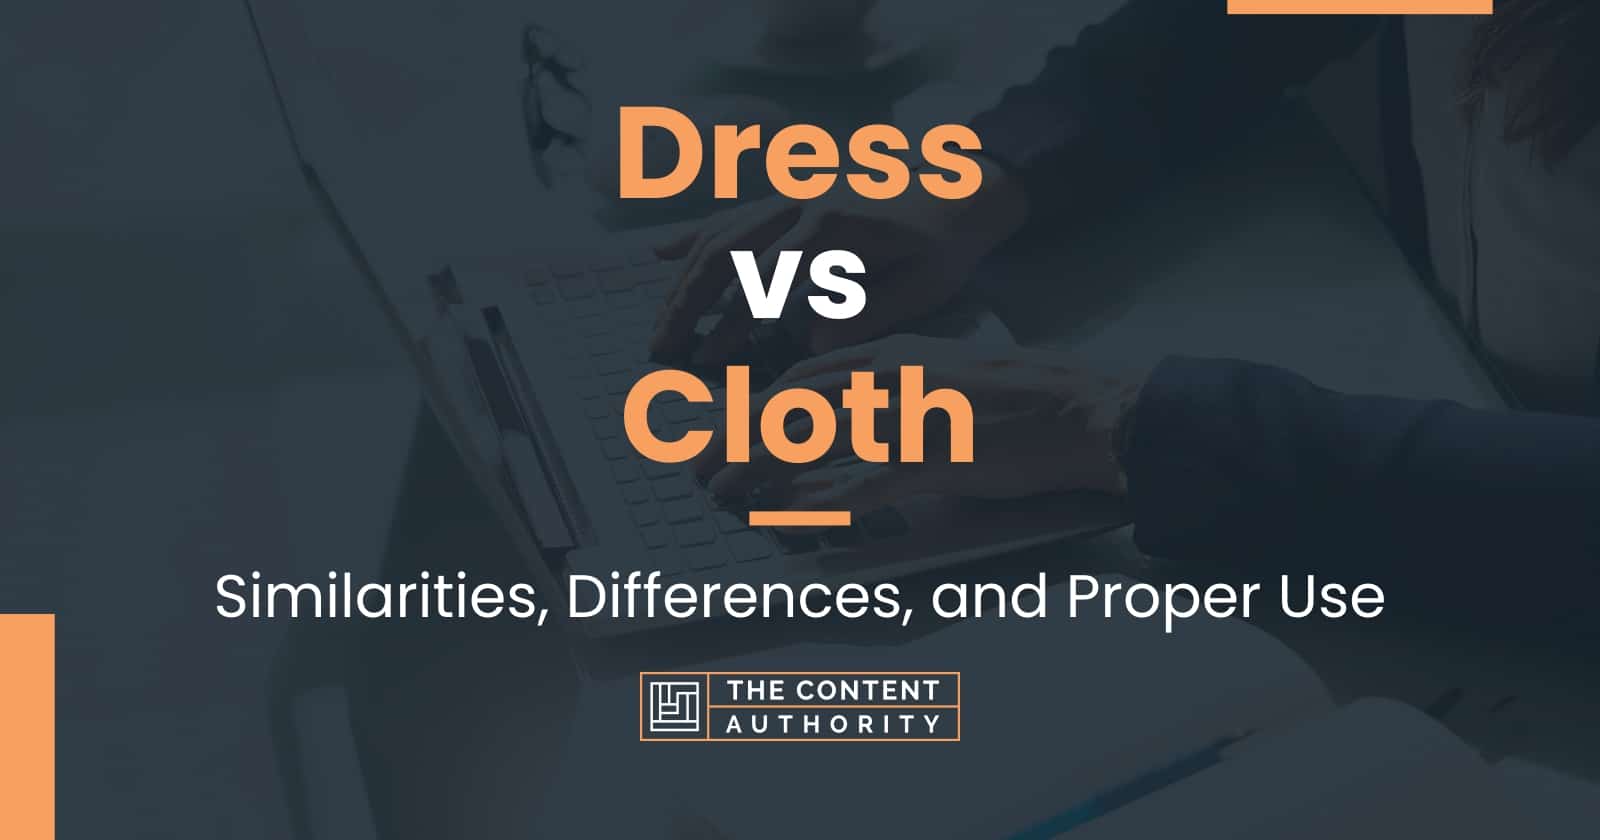 Dress vs Cloth: Similarities, Differences, and Proper Use